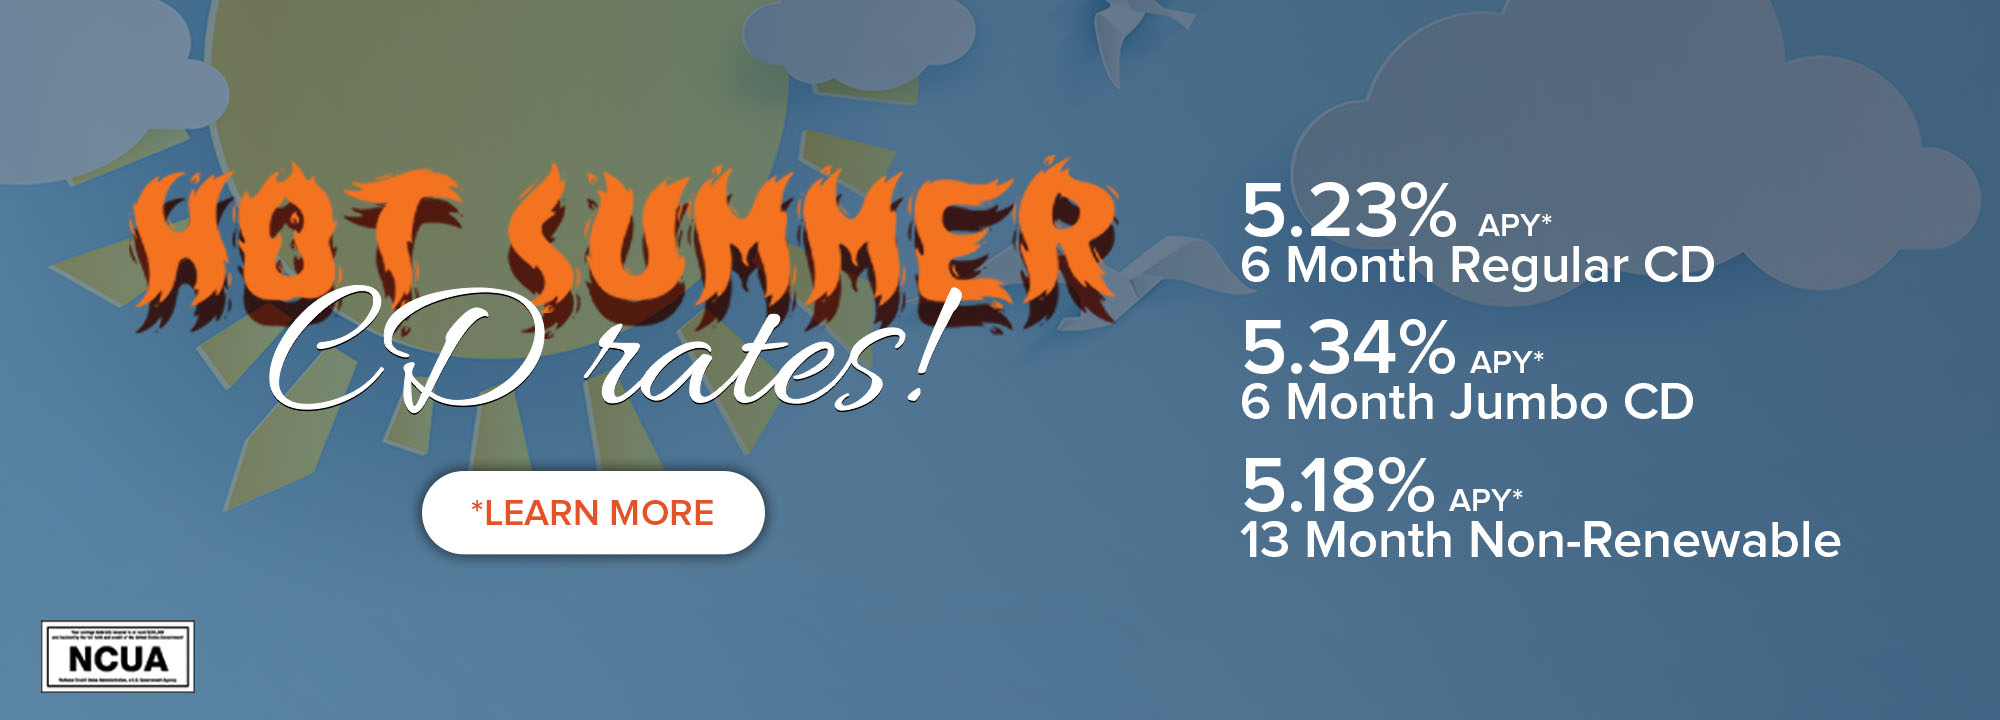 Hot summer CD rates! 5.23% APY* 6 Month Regular CD. 5.34% APY* 6 Month Jumbo CD. 5.18% APY* 13 Month Non-Renewable. *Learn More